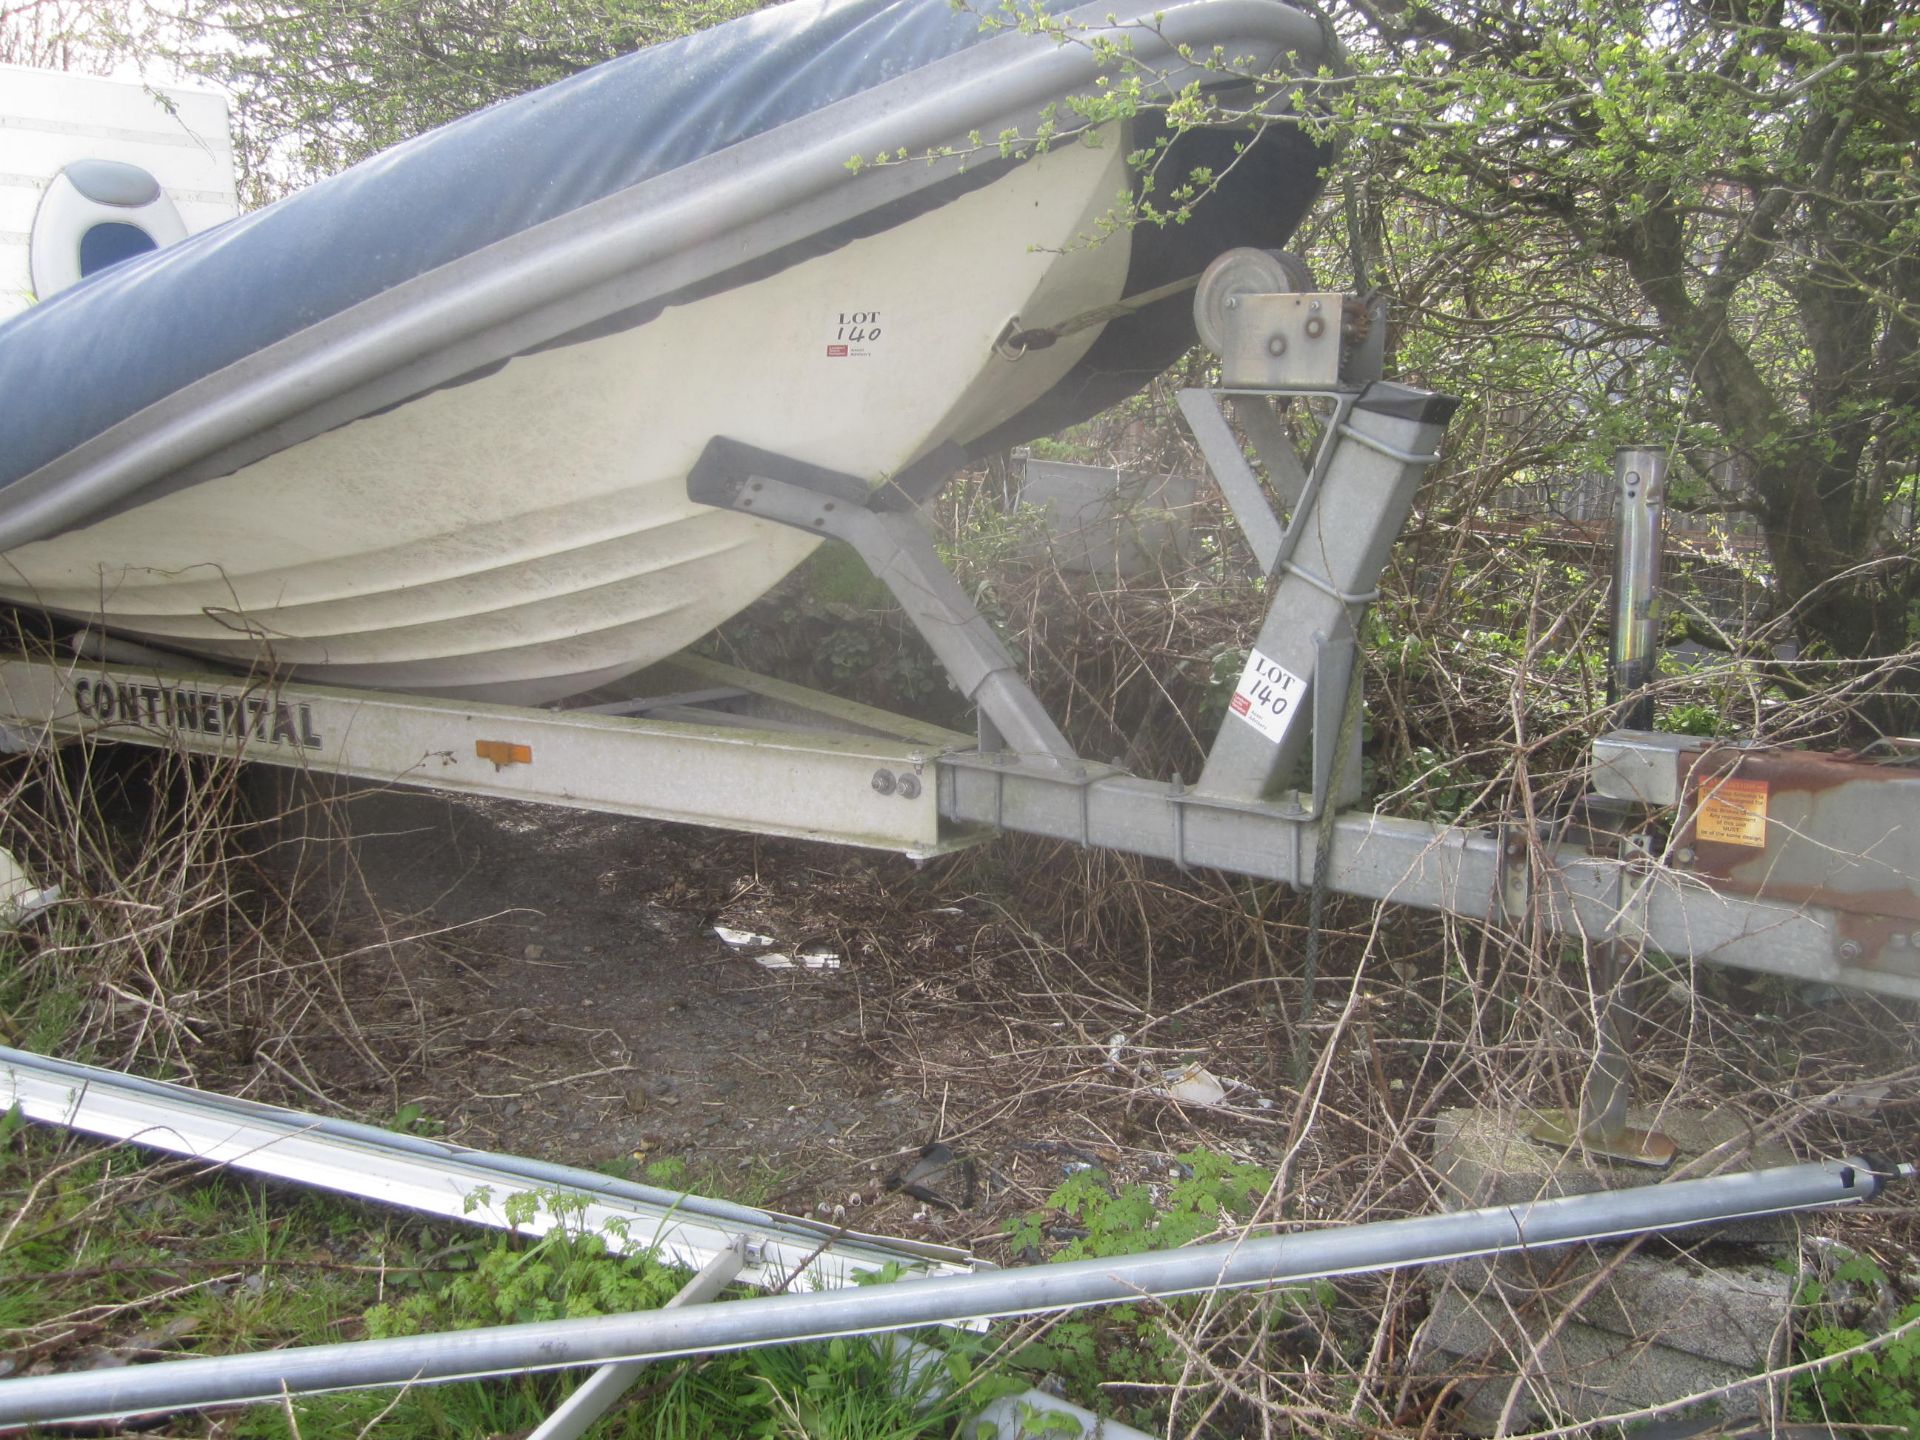 Mullacott manufactured rib speed leisure boat, fibreglass hull, with trailer (sold as spares - Image 6 of 7